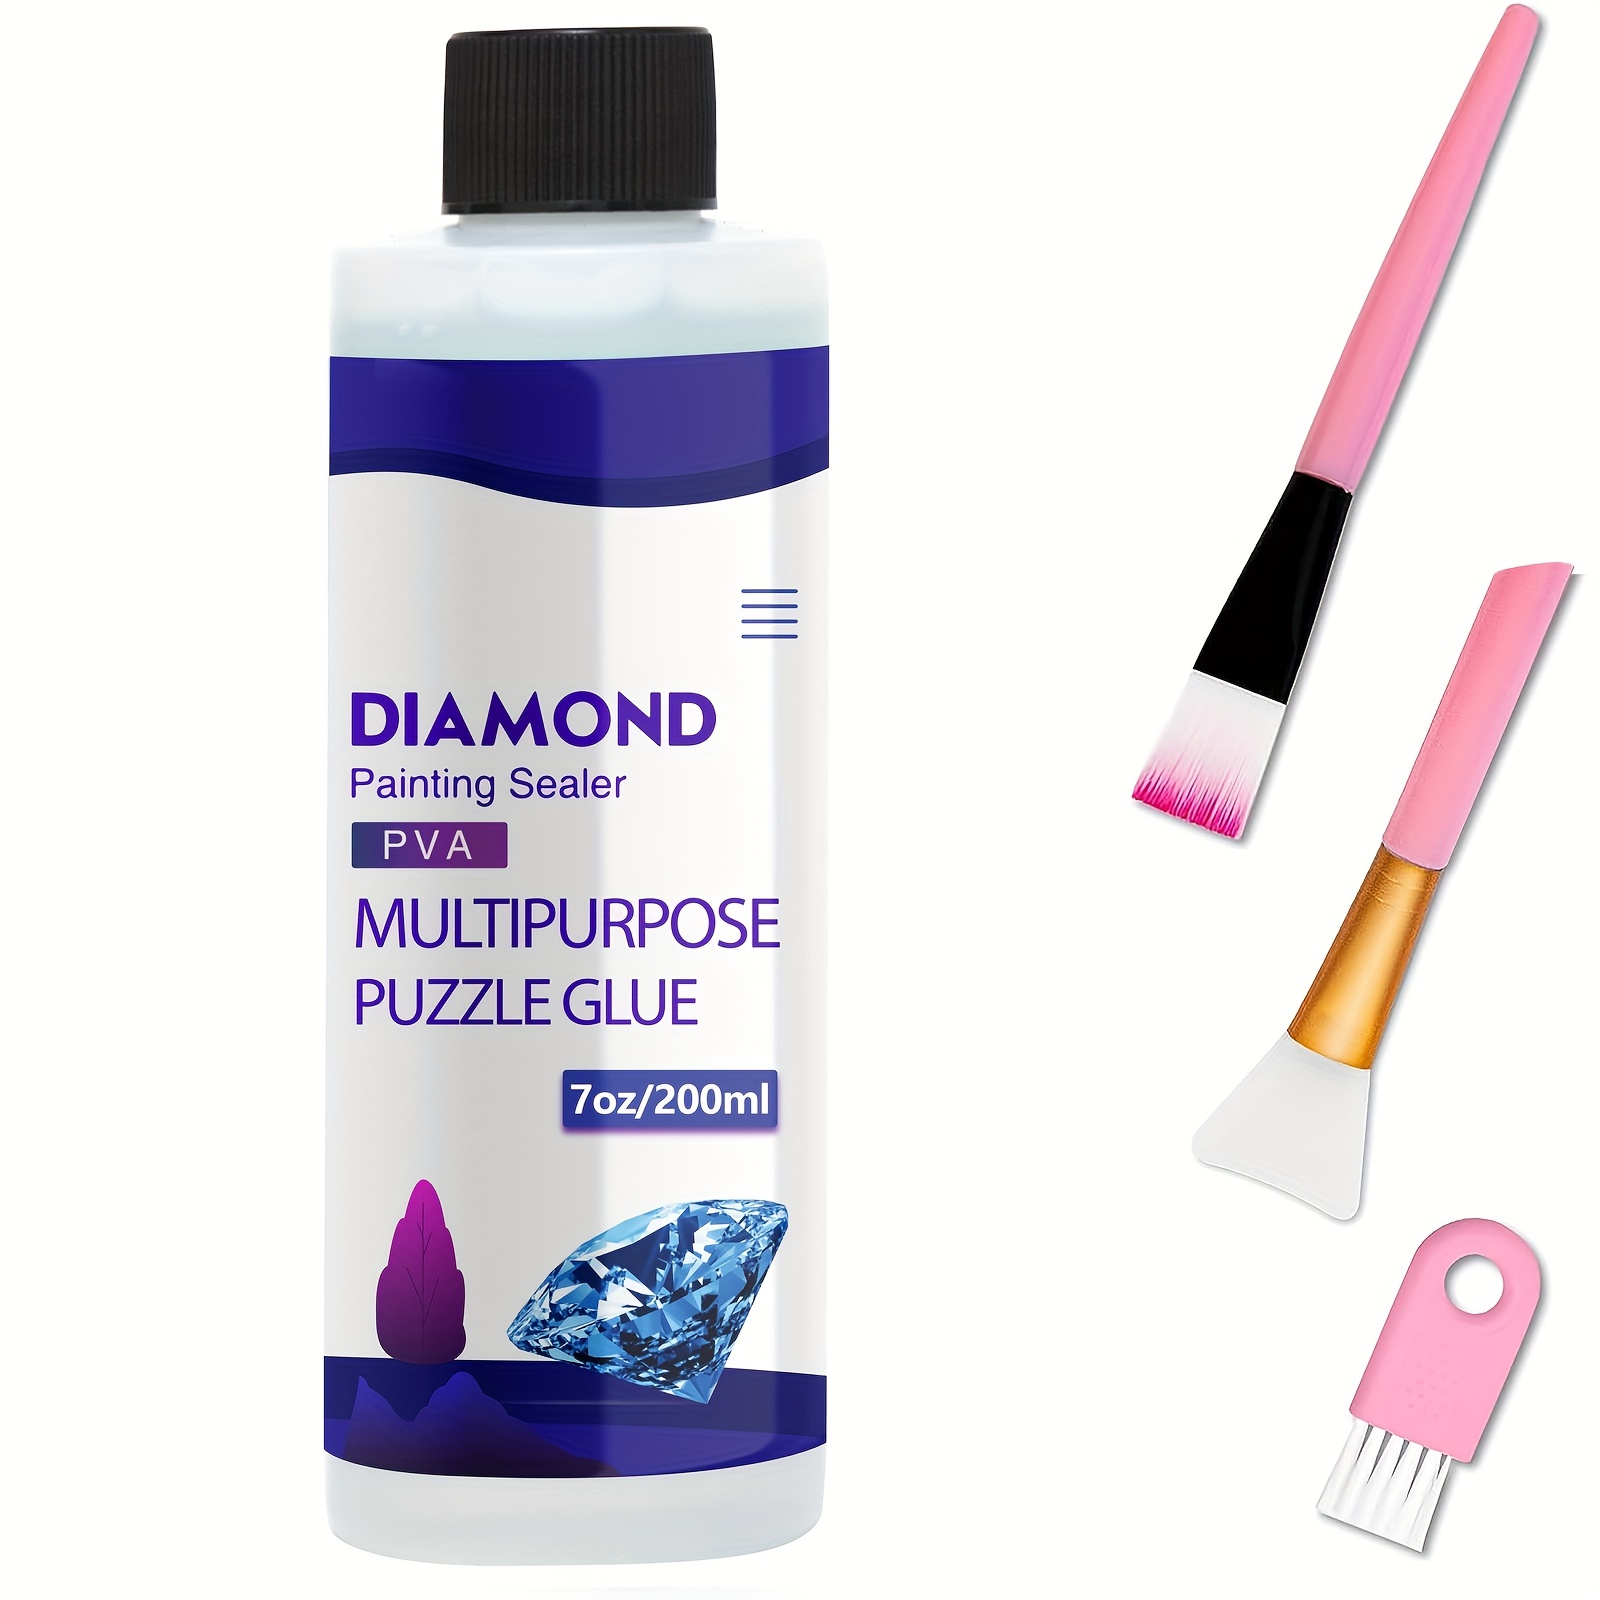  Puzzle Glue,Diamond Art Sealer Clear Finish  Puzzle Glue  Seal Glitter Paint Jigsaw DIY Craft,One Piece Design Diamond Accessories  and Tools Keep Shine Dongtian : Toys & Games